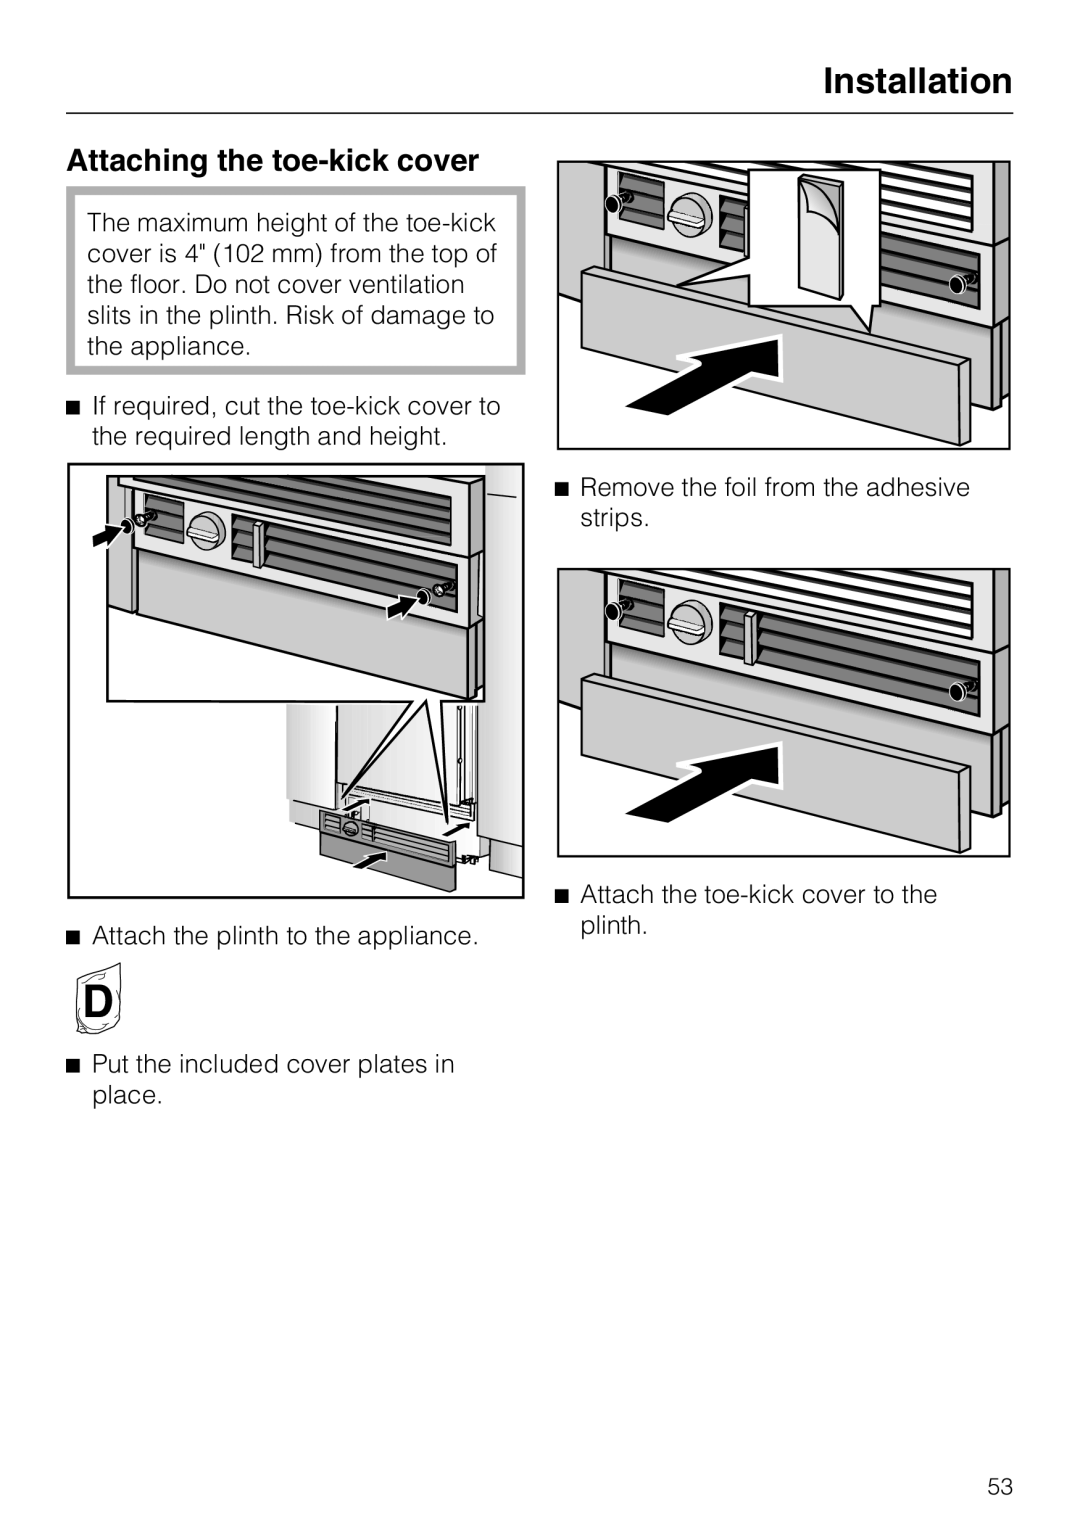 Miele KWT 1611 SF, KWT 1601 SF installation instructions Attaching the toe-kickcover, Installation 